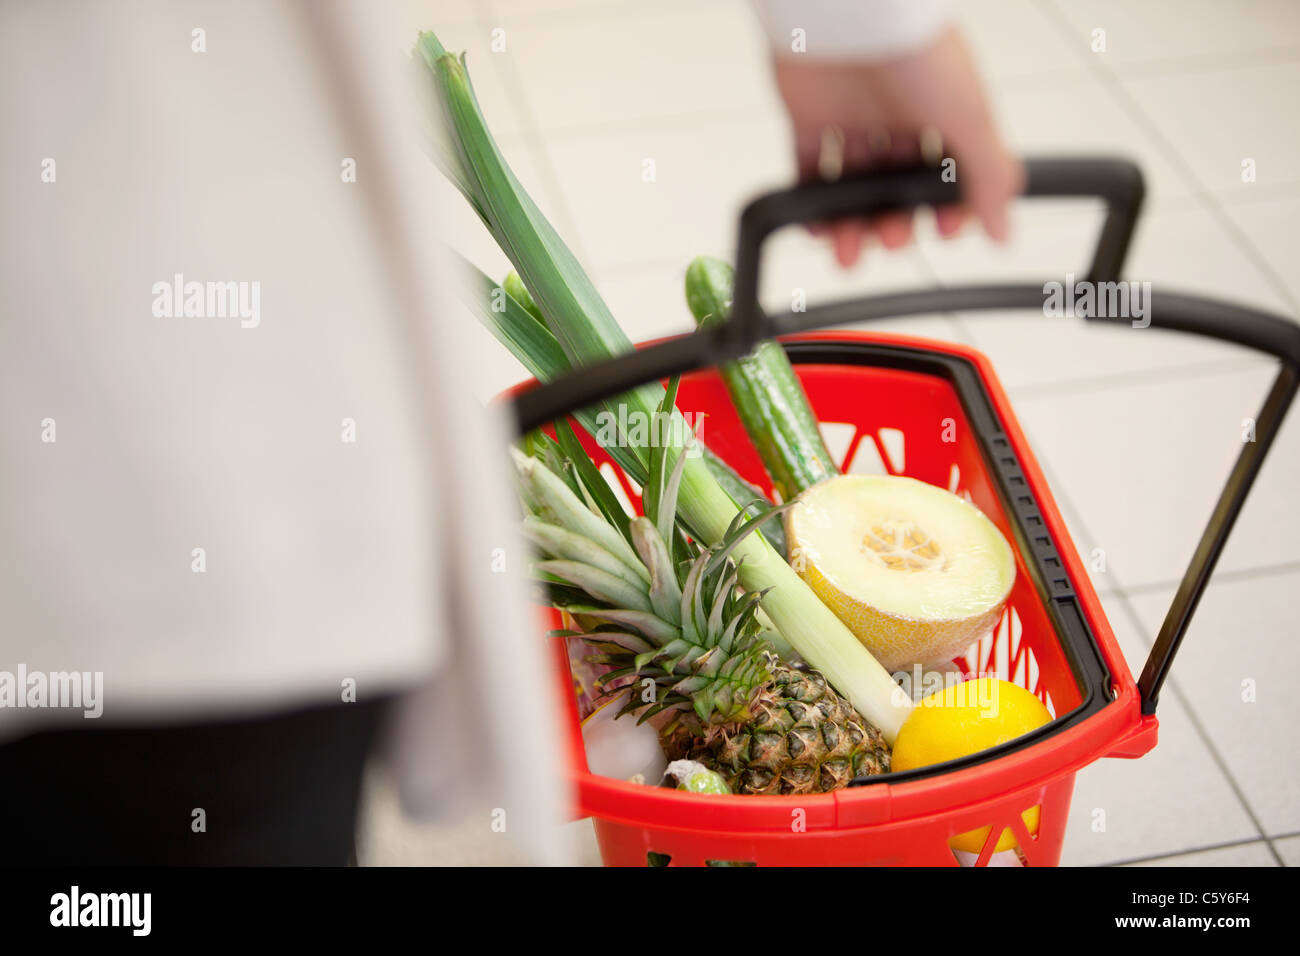 High angle view of human hand carrying red basket filled with fruits and vegetables Stock Photo